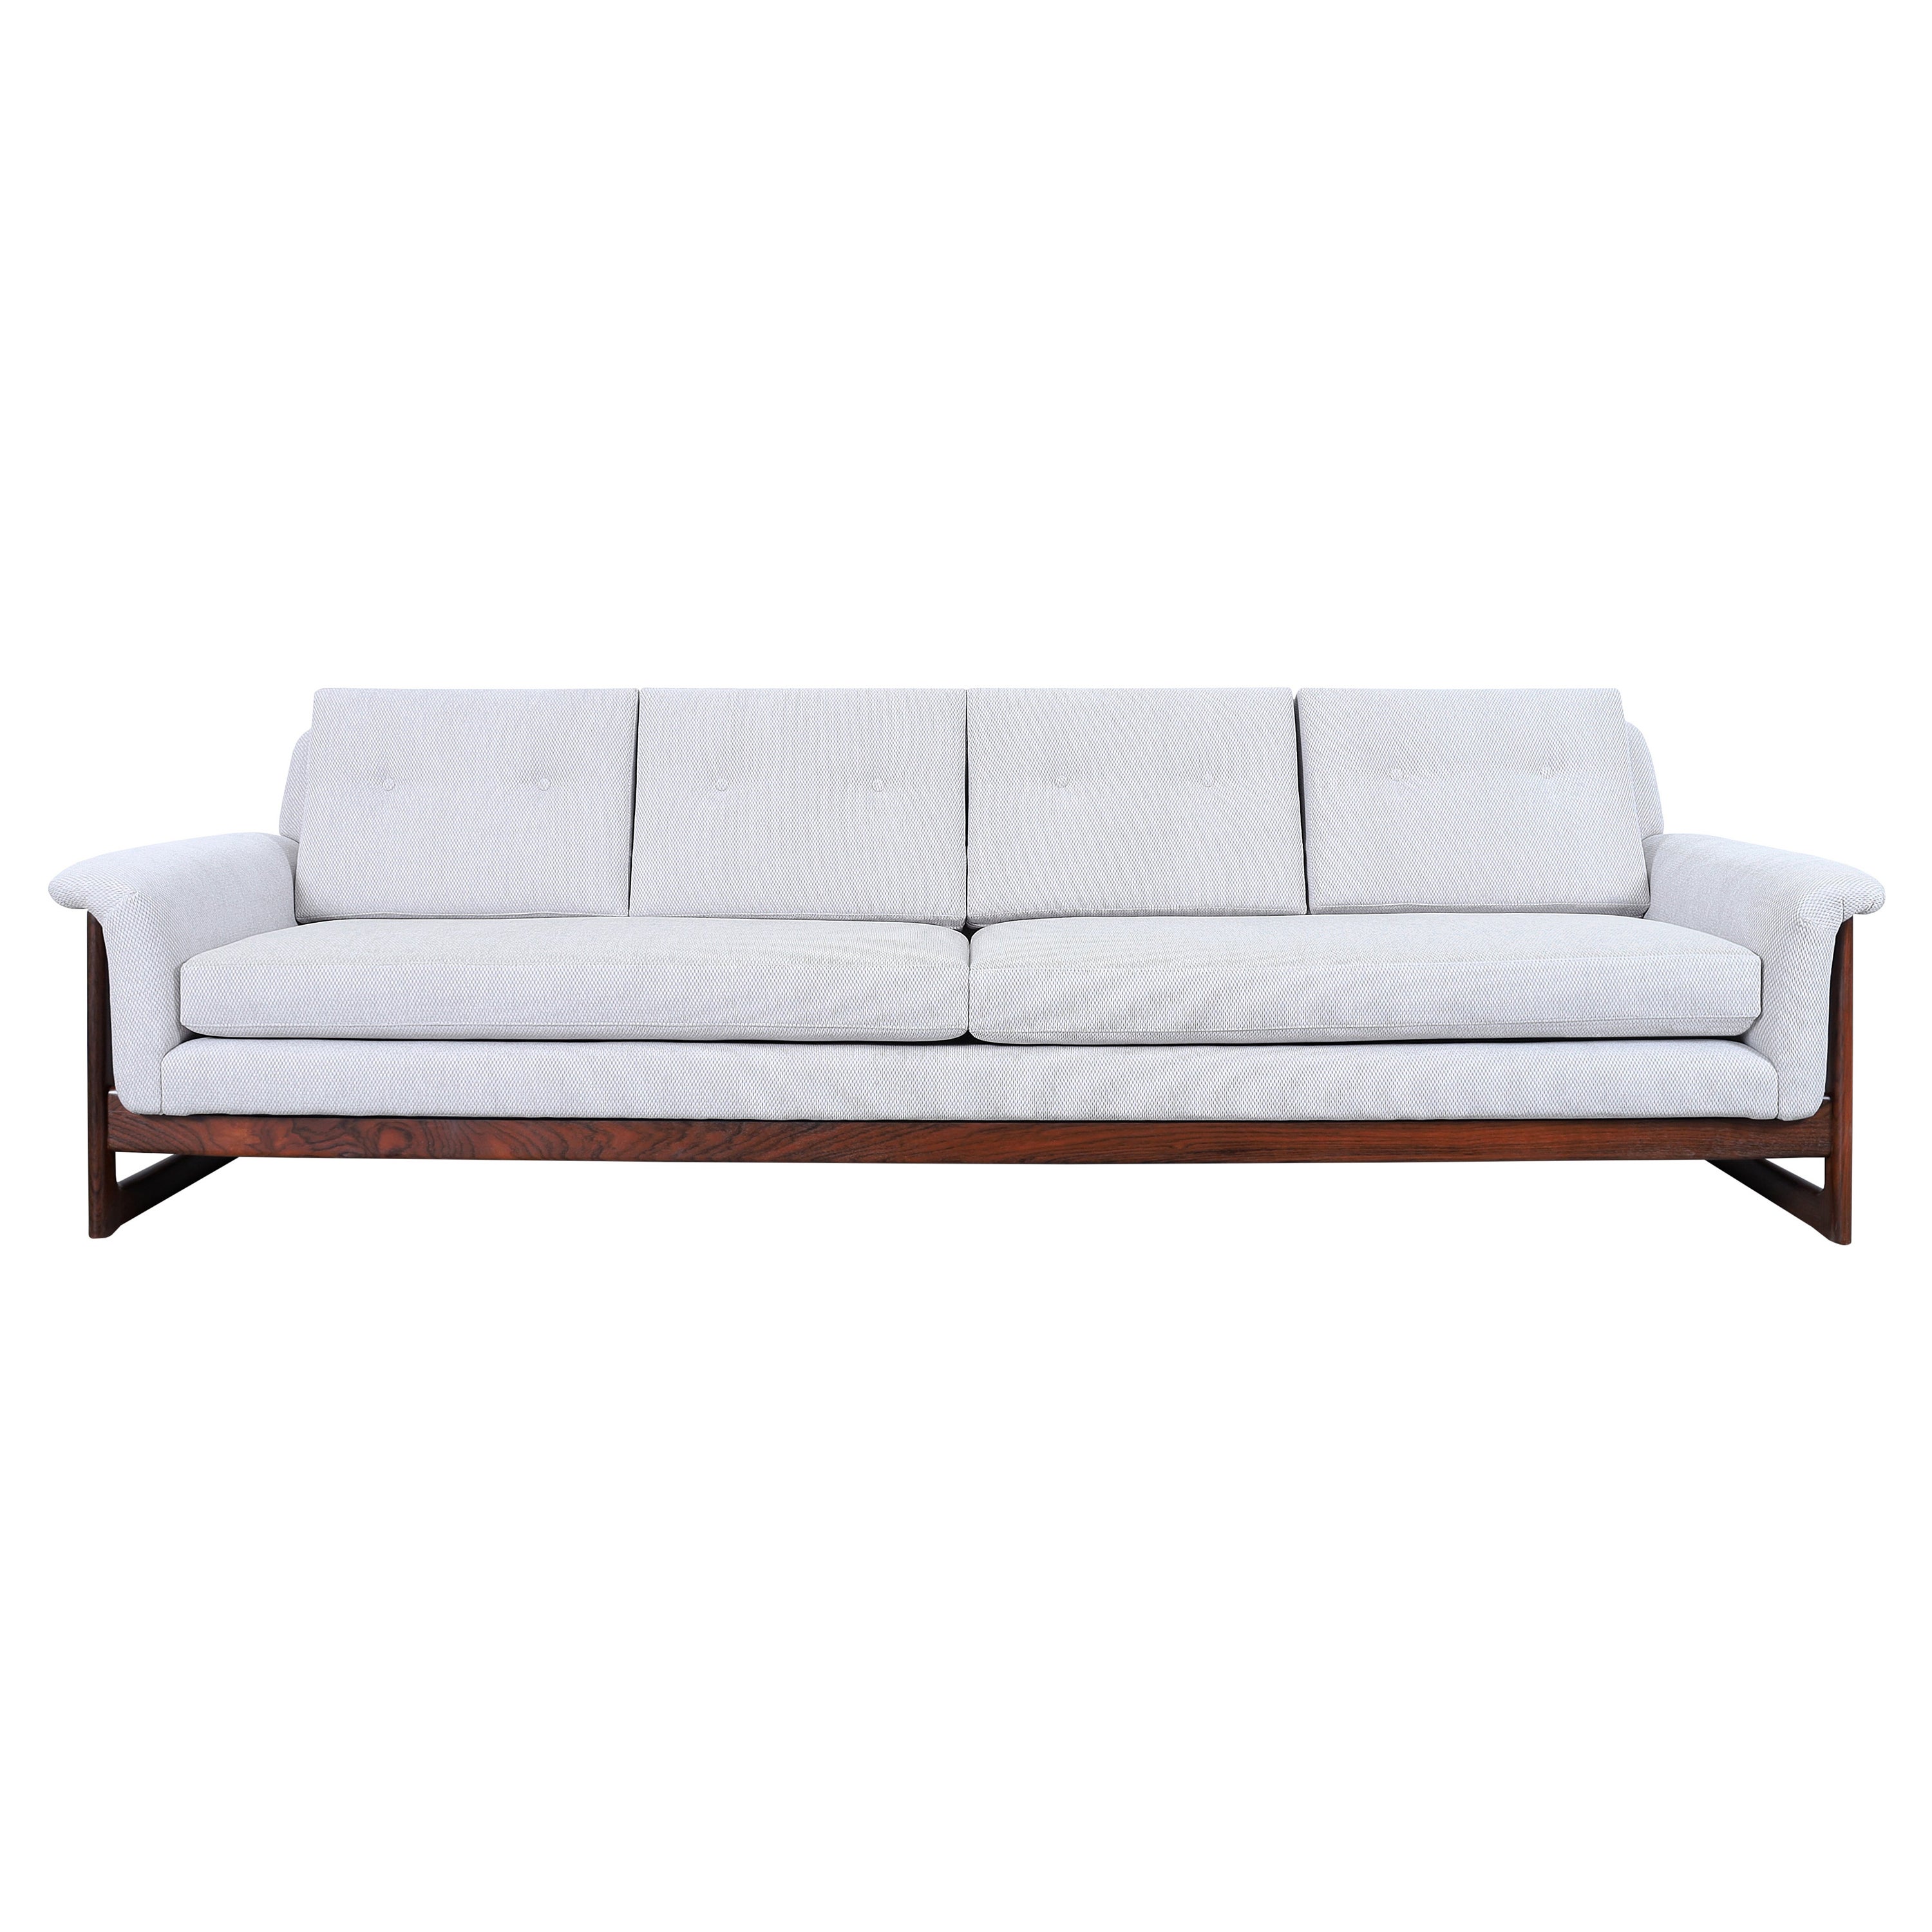 Dux of Sweden Sofas - 21 For Sale at 1stDibs | dux couch, dux sofa 